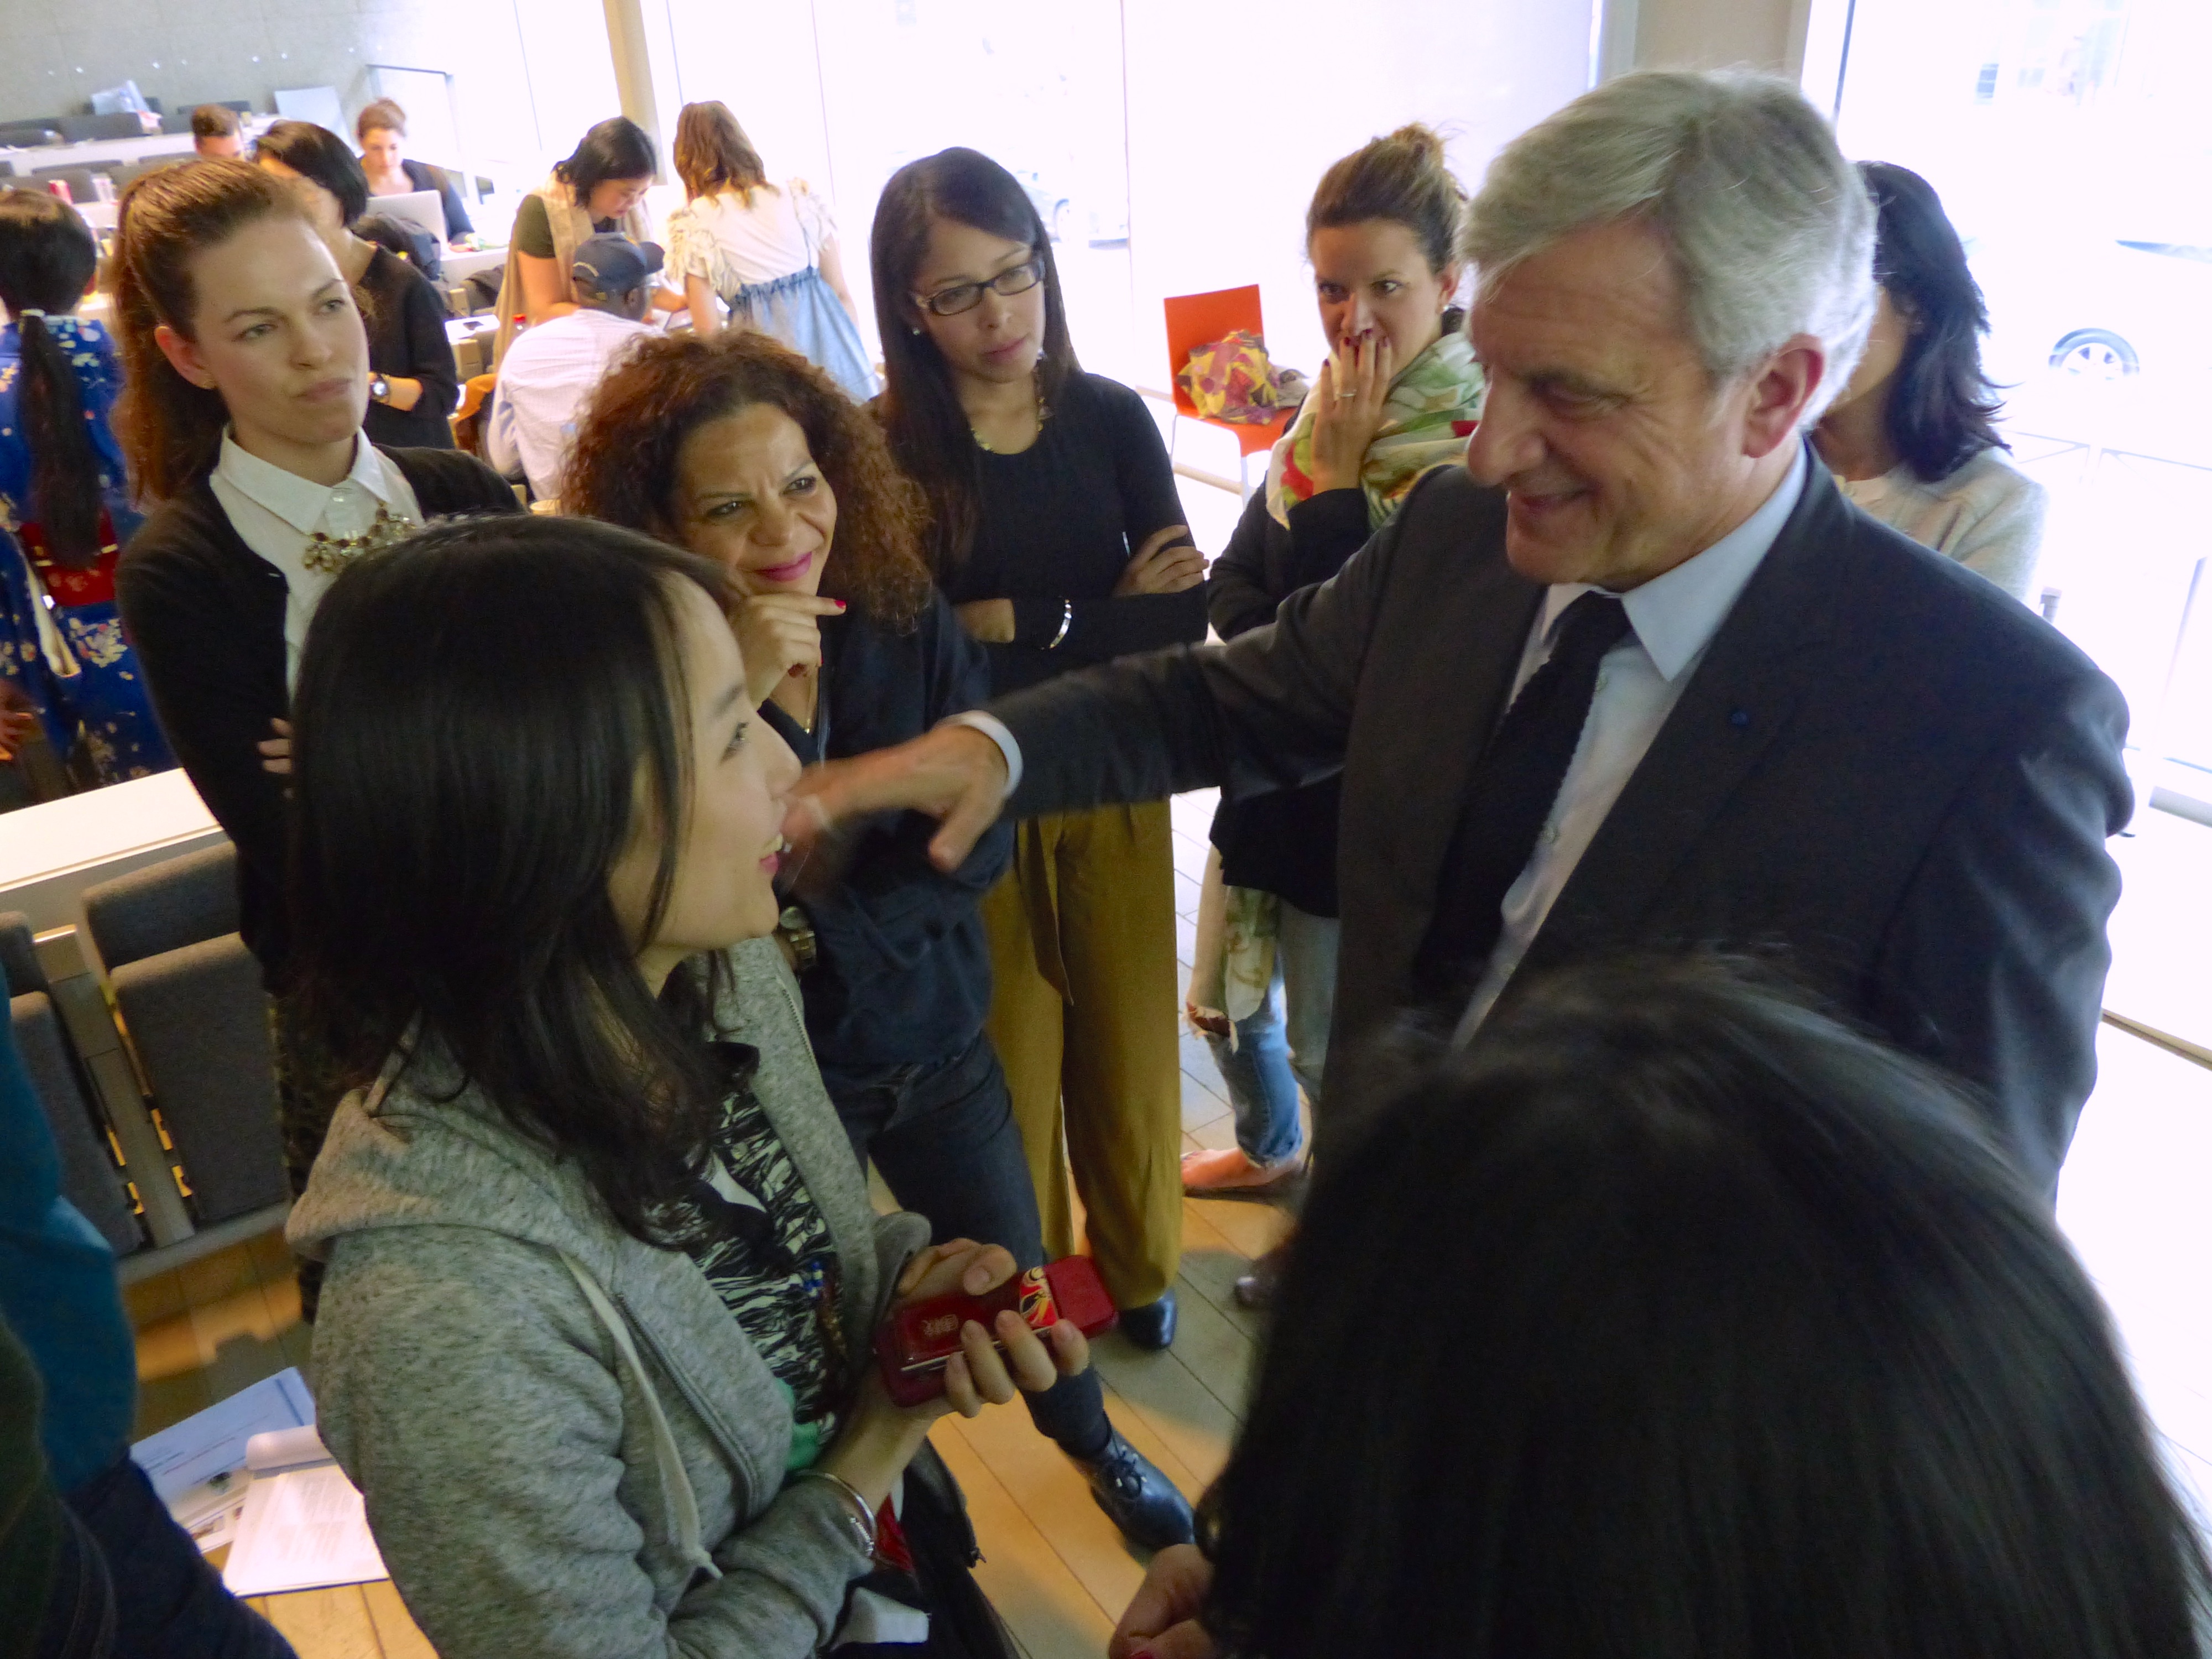 Sydney Toledano, Chief Executive of Christian Dior, meeting with GFM students at the Paris Seminar